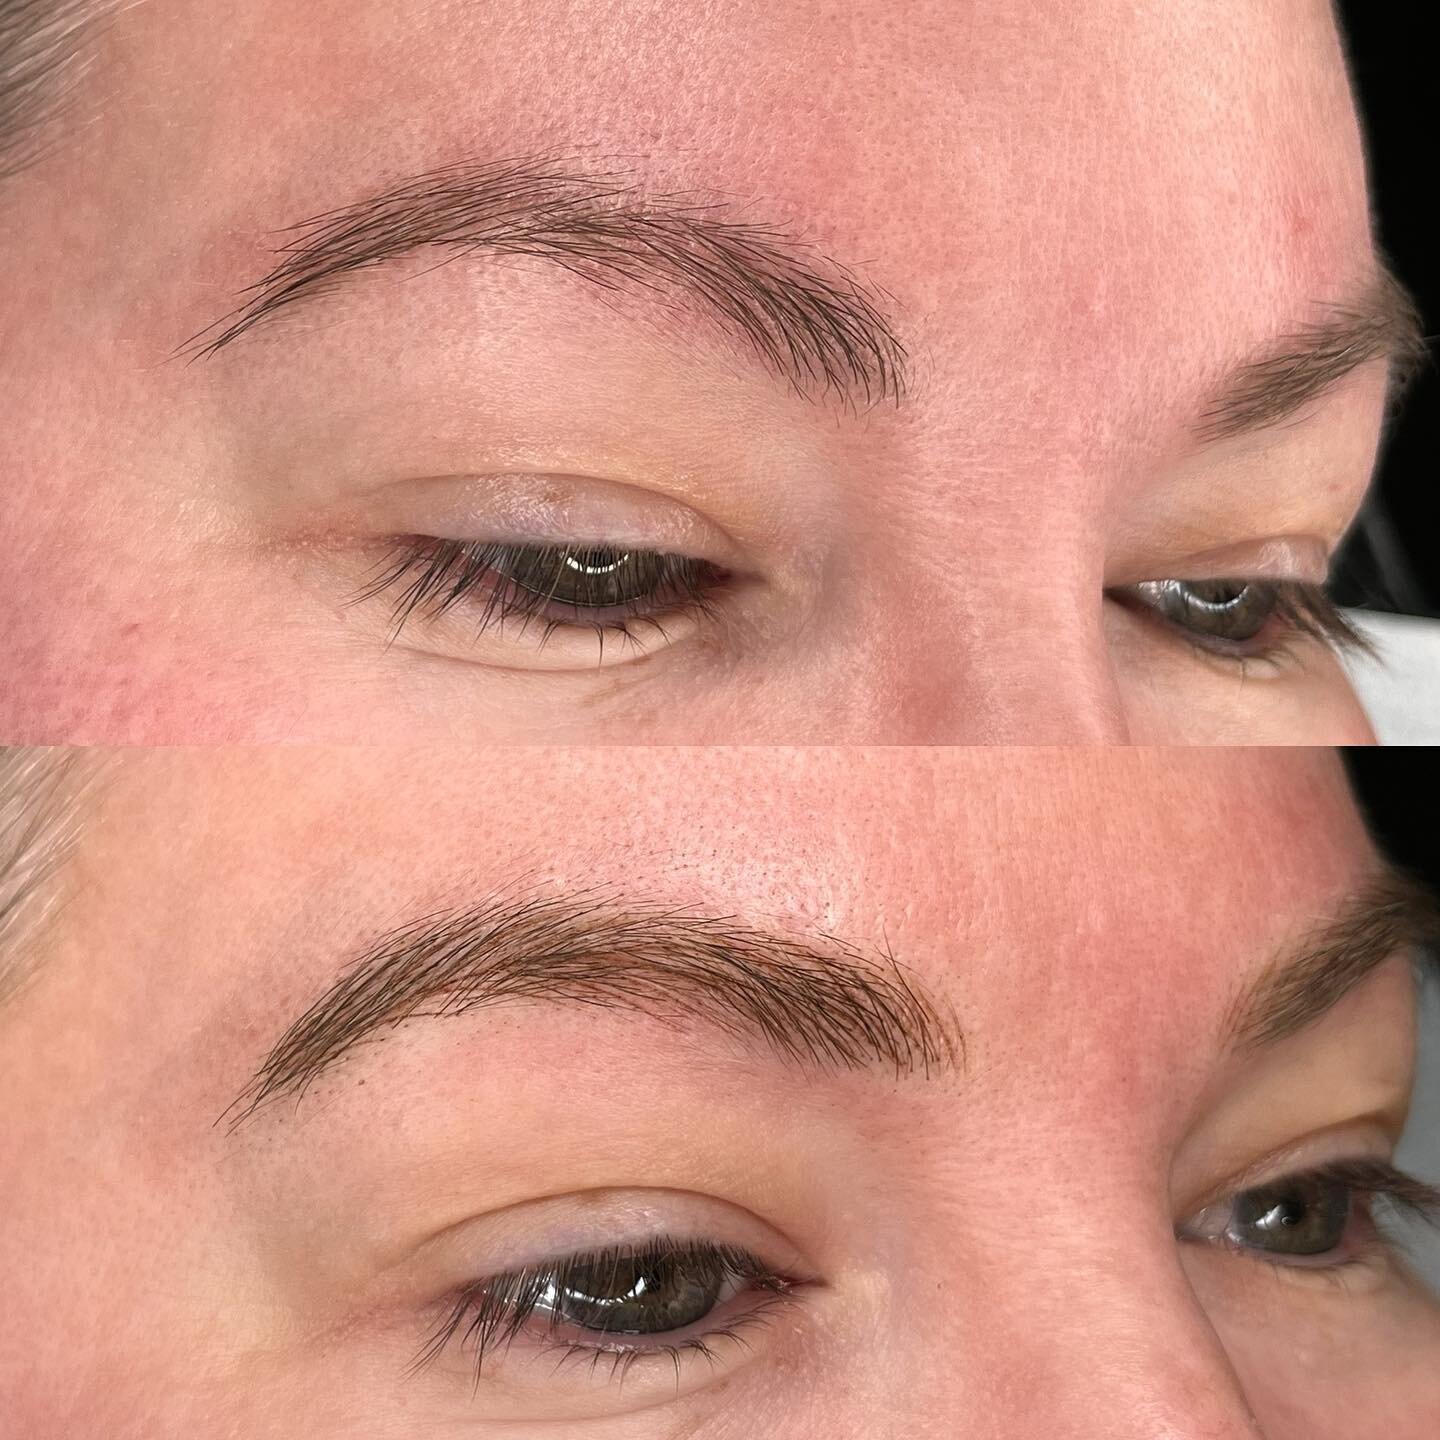 ✨Nano Brows✨ When you want tattooed brows that don&rsquo;t look like tattoos 😉 I love nano for creating the most realistic, natural results possible. ✨ This angel has been trusting me with her beautiful face for over 5 years! 🥲 Her previous microbl